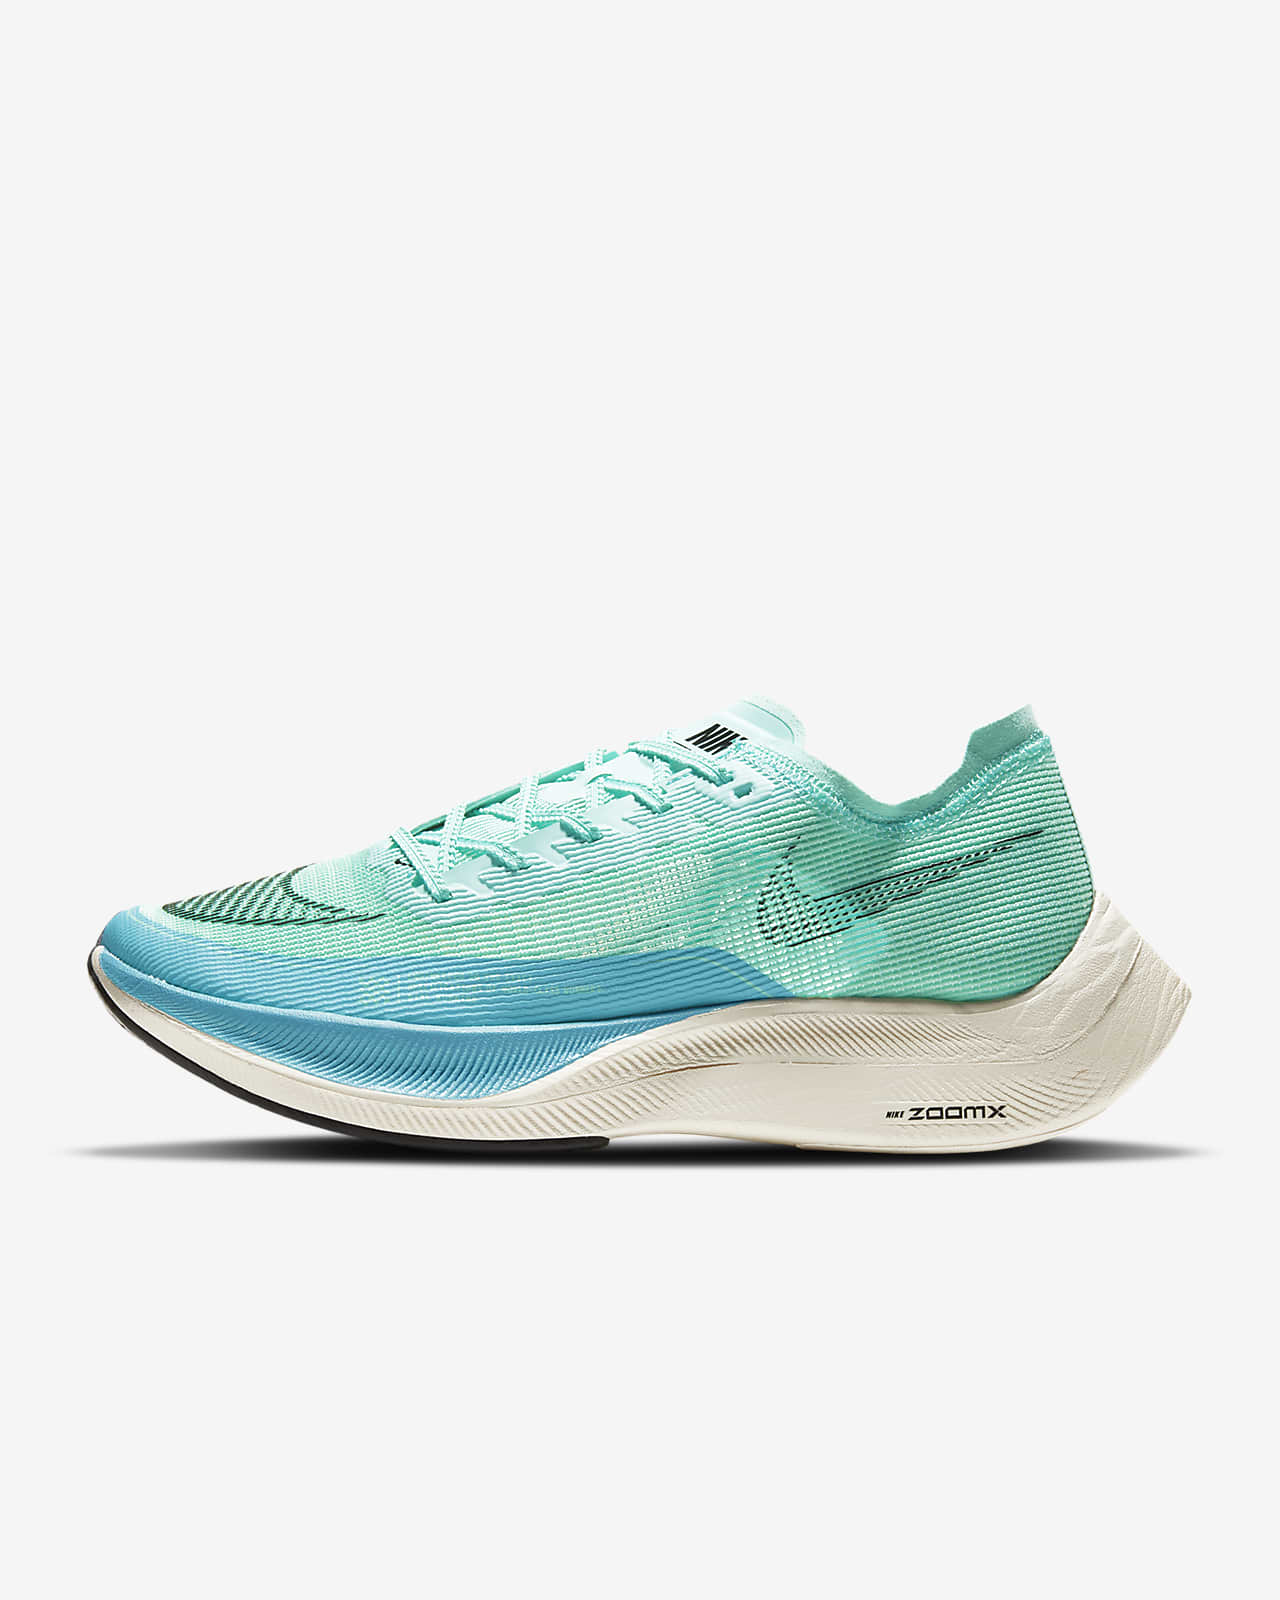 Nike ZoomX Vaporfly Next% 2 Men's Road Racing Shoes مقشر للوجه